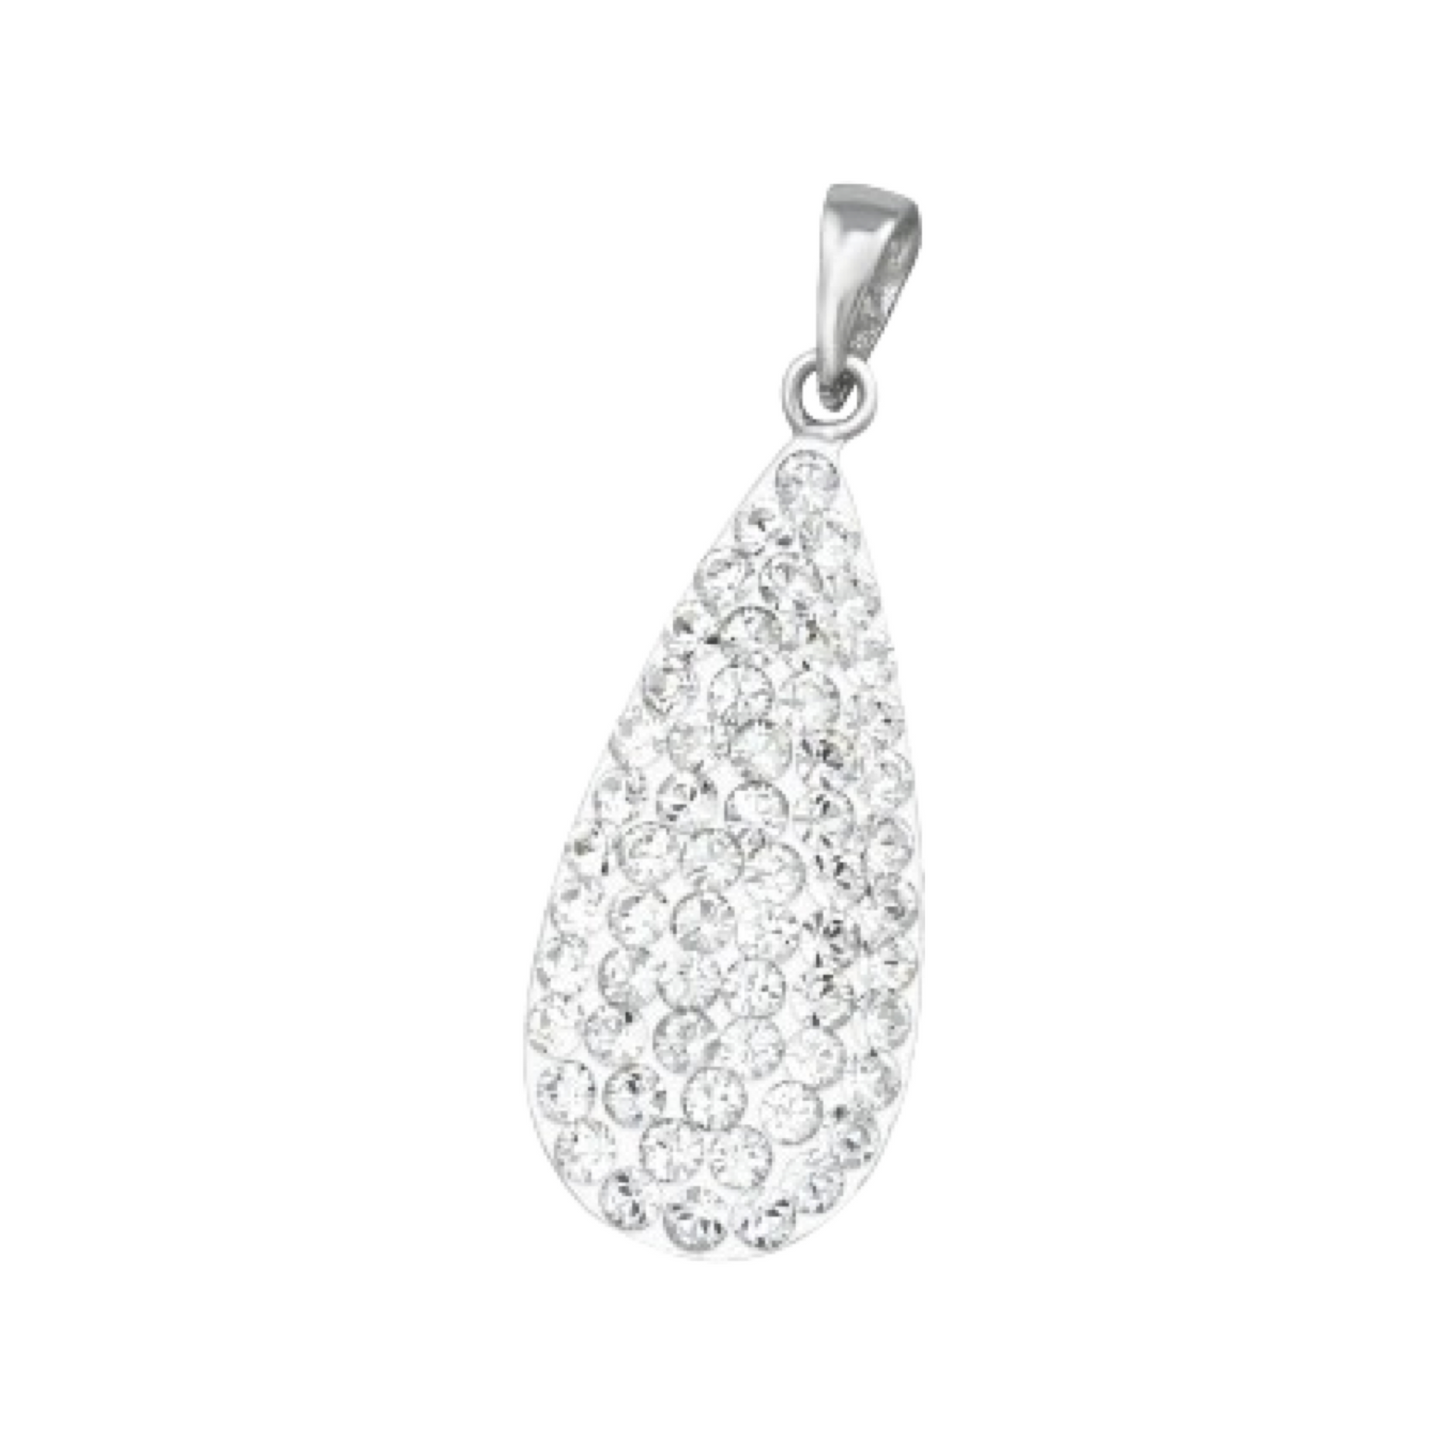 Silver Pear Pendant with Genuine European Crystals